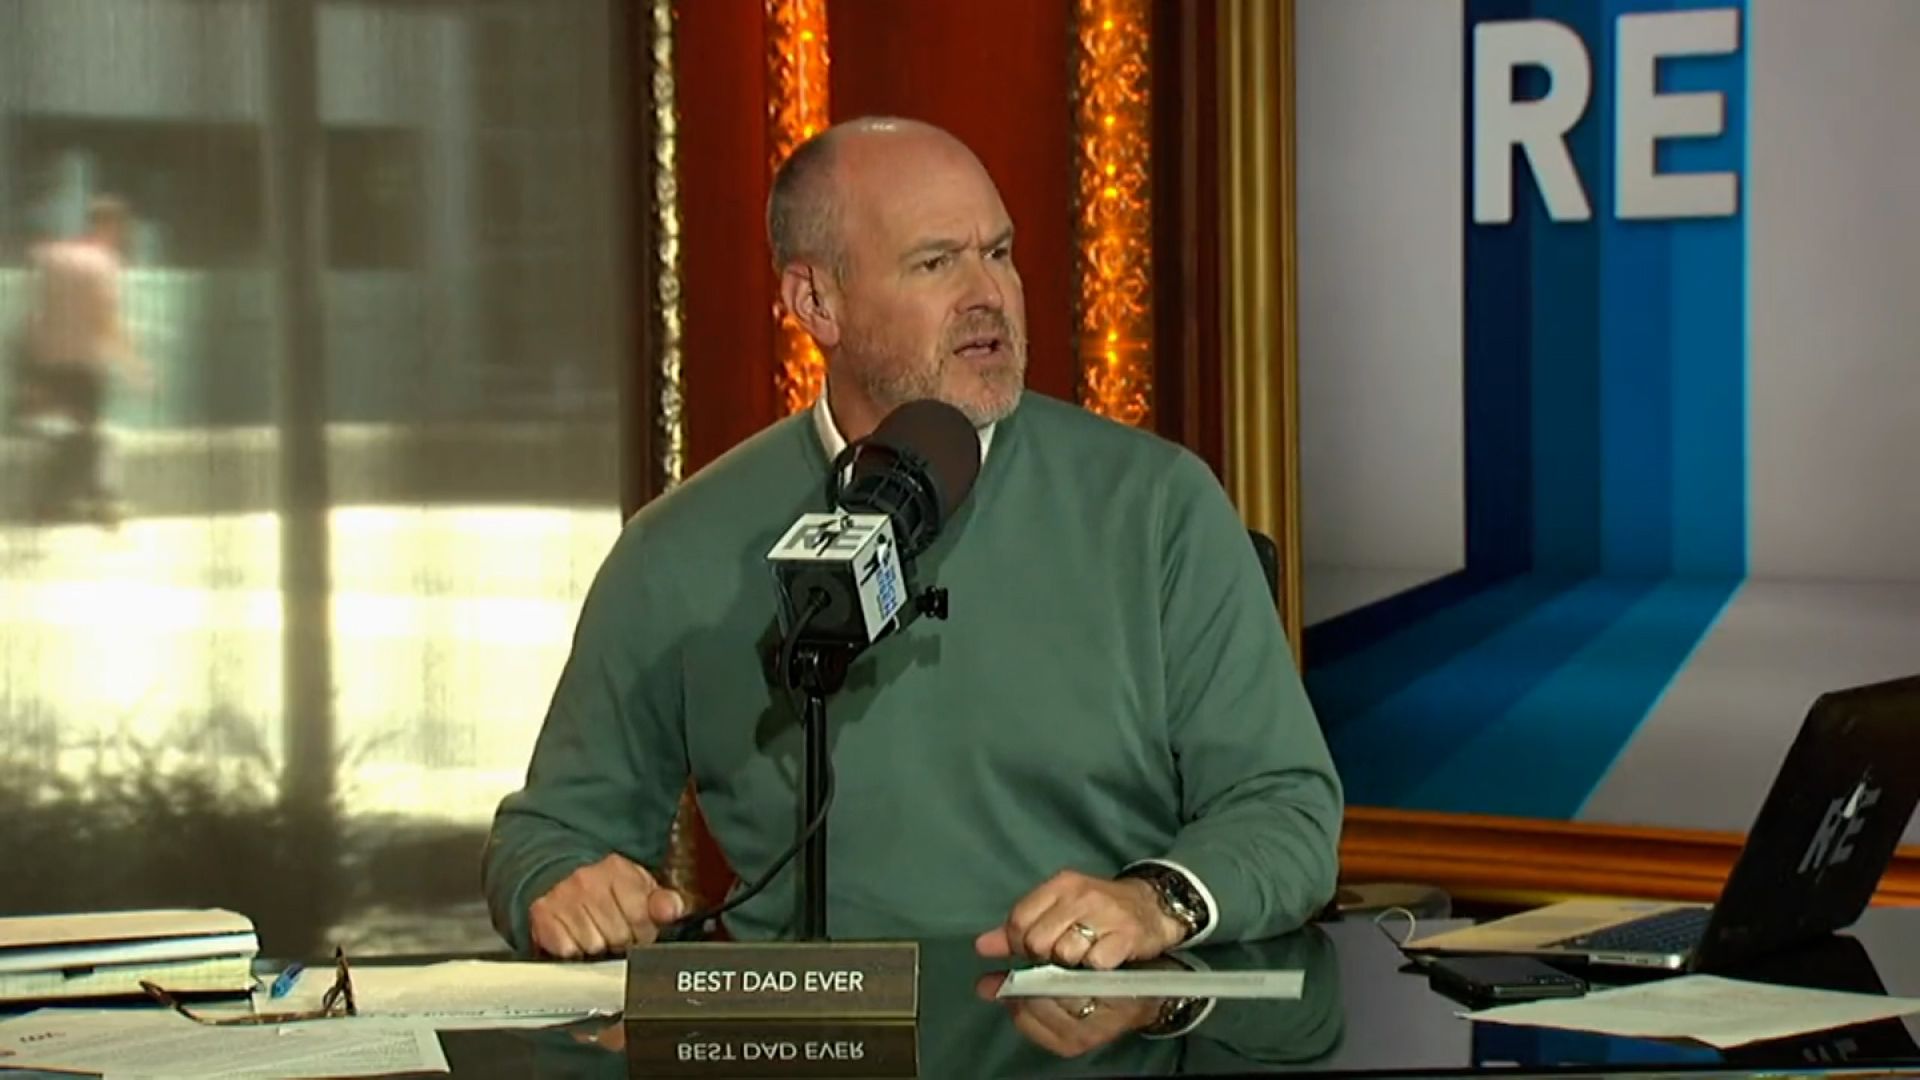 VIDEO: Sports host Rich Eisen gives impassioned plea on gun laws